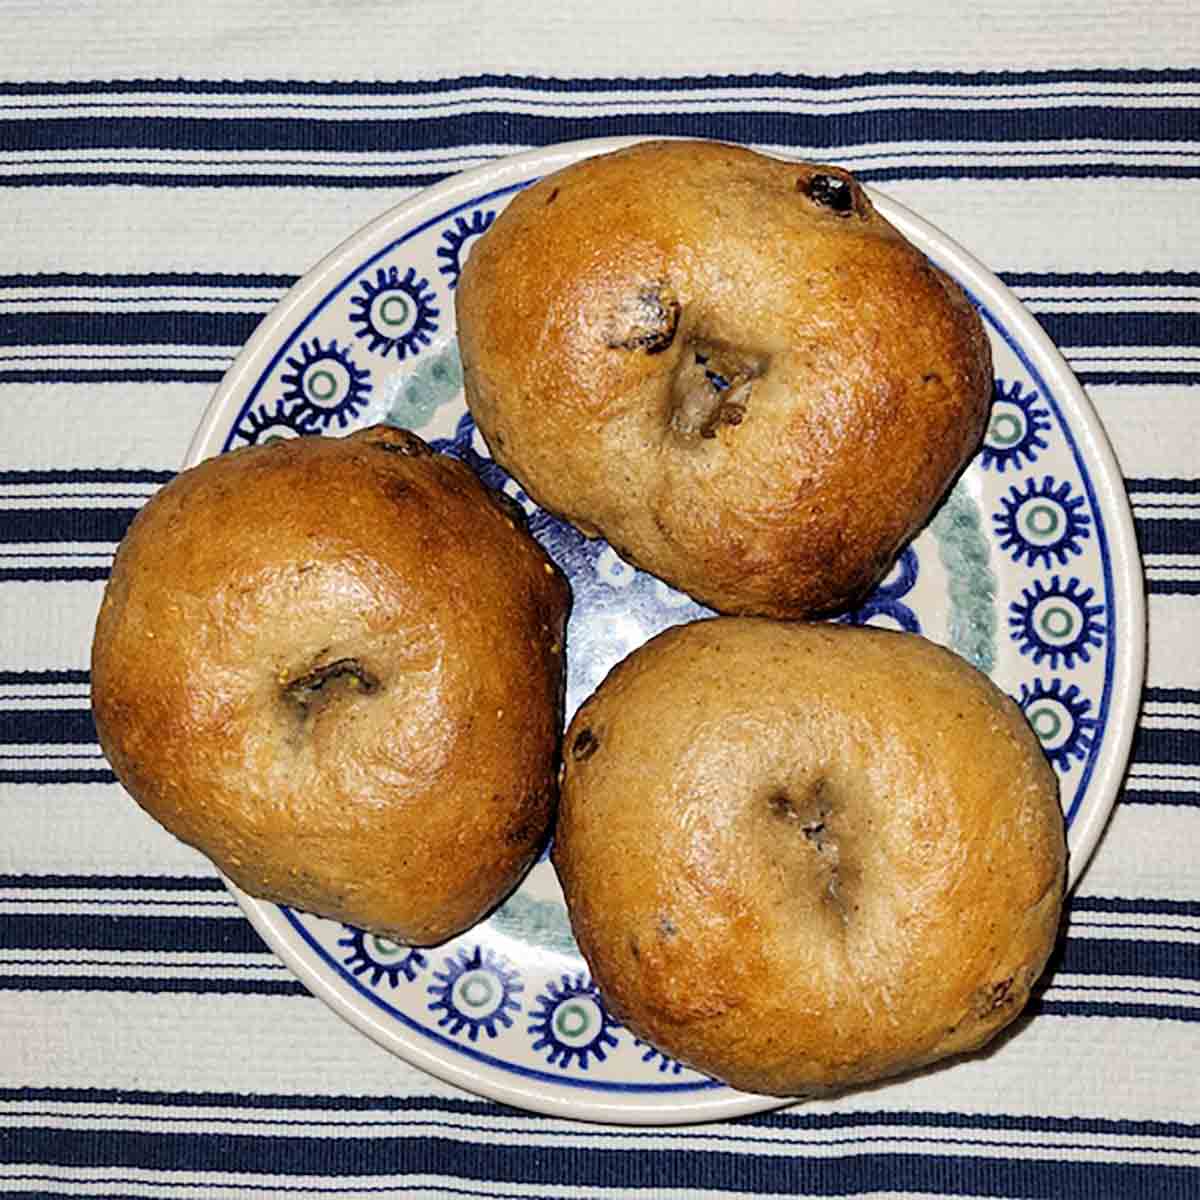 Three homemade cinnamon raisin bagels on a blue and white plate.